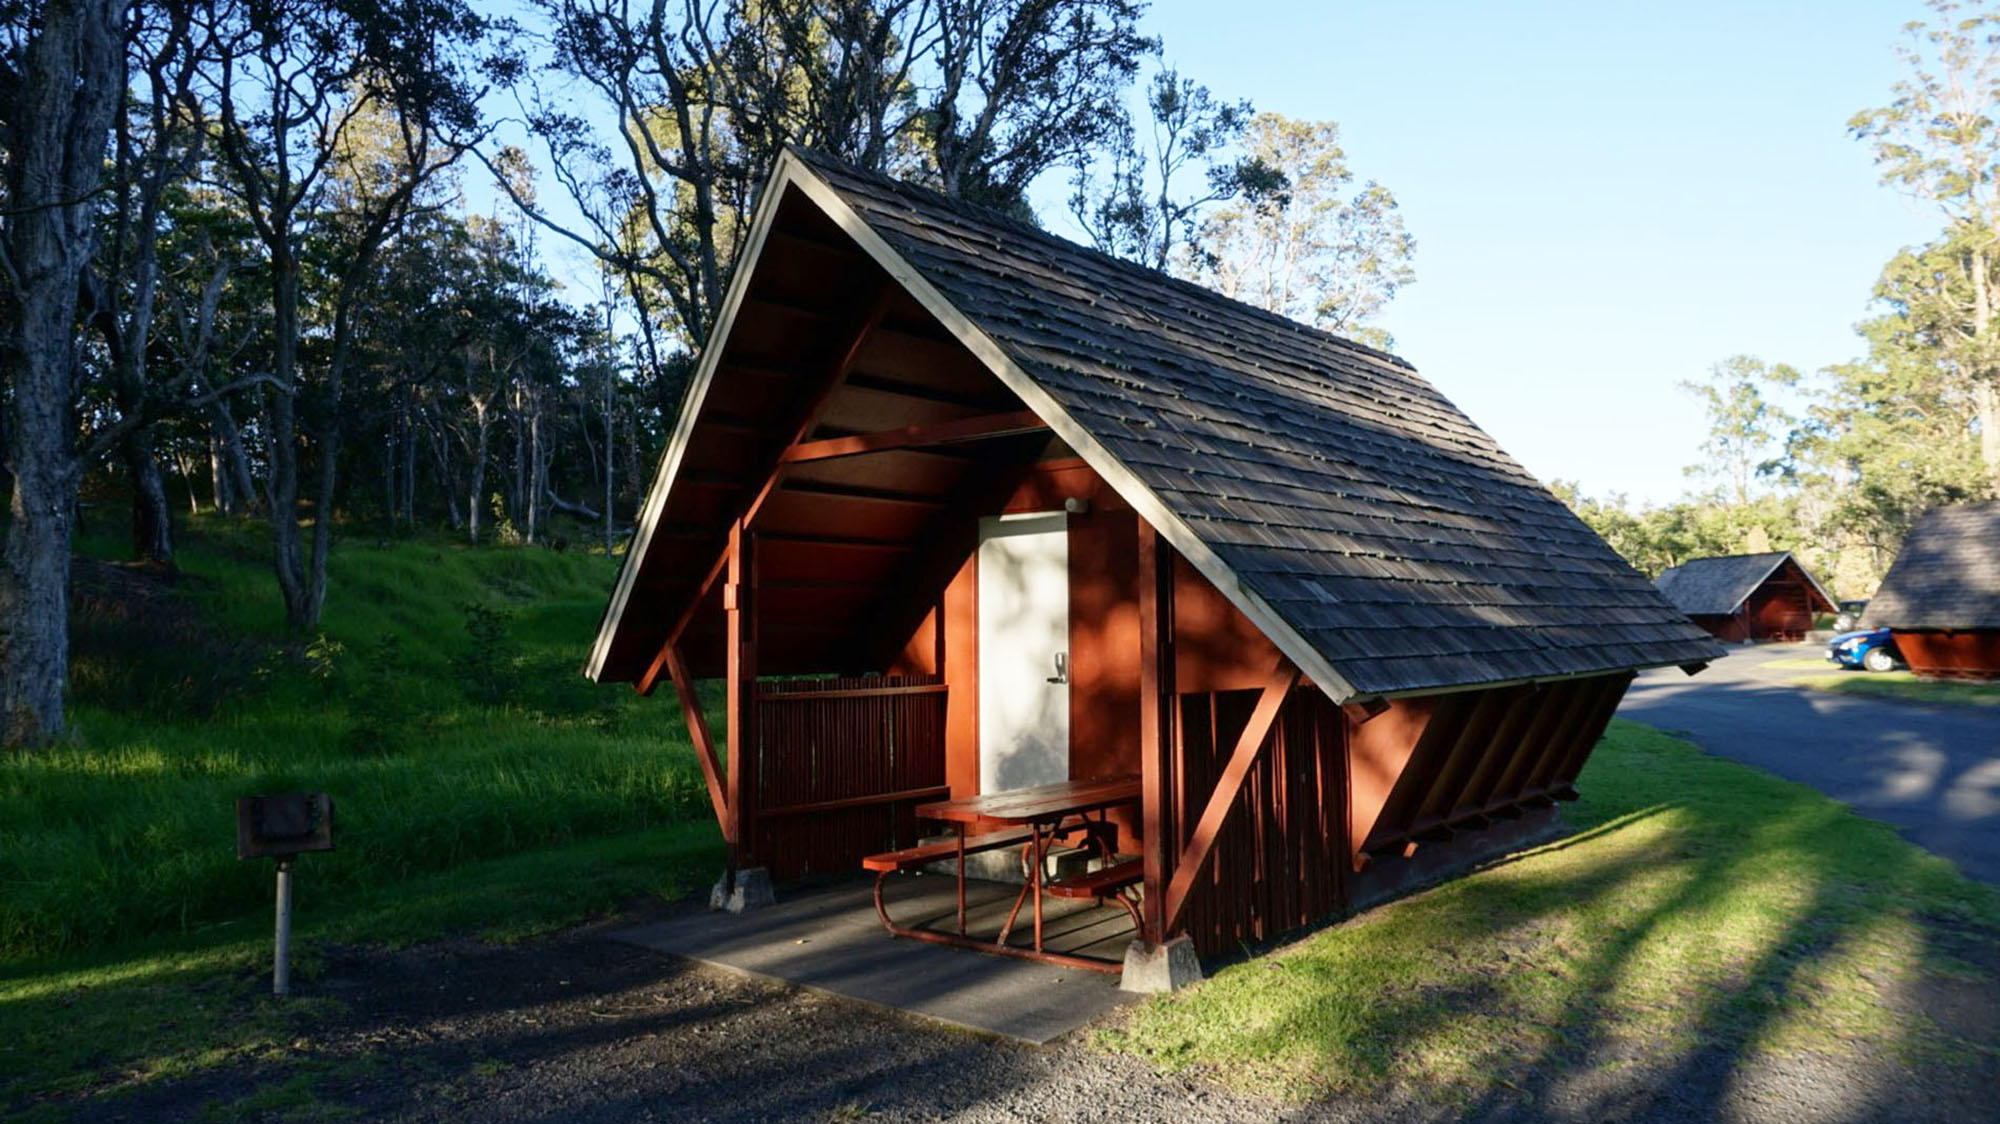 On the Island of Hawaii, the cabins at Namakanipaio are a fun alternative to staying at the Volcano House.